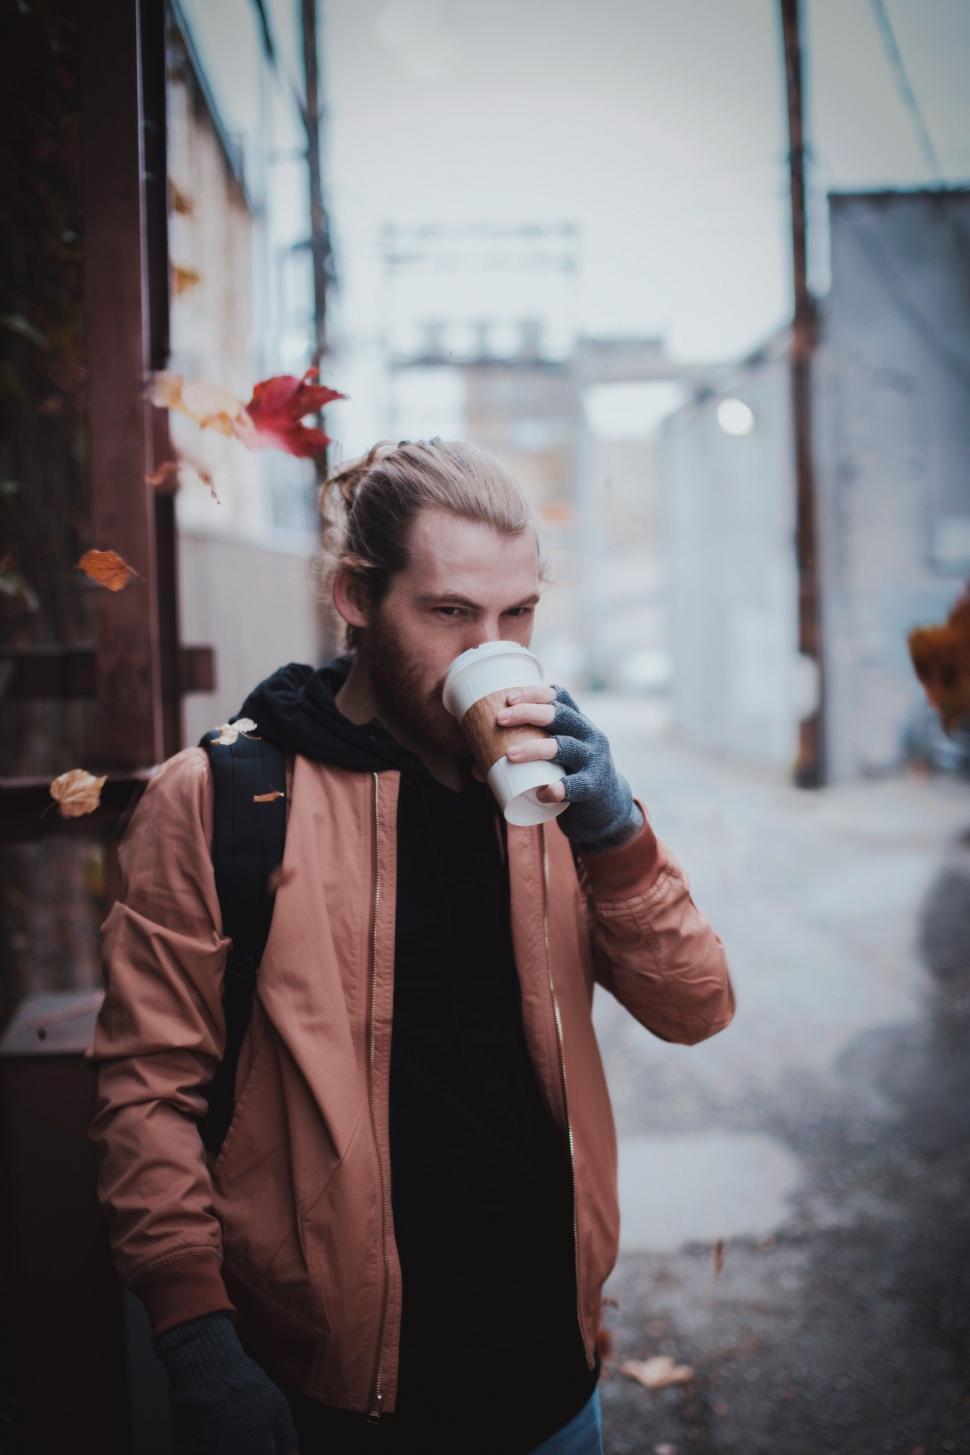 Free Image of Man Standing on Street Holding a Cup of Coffee 